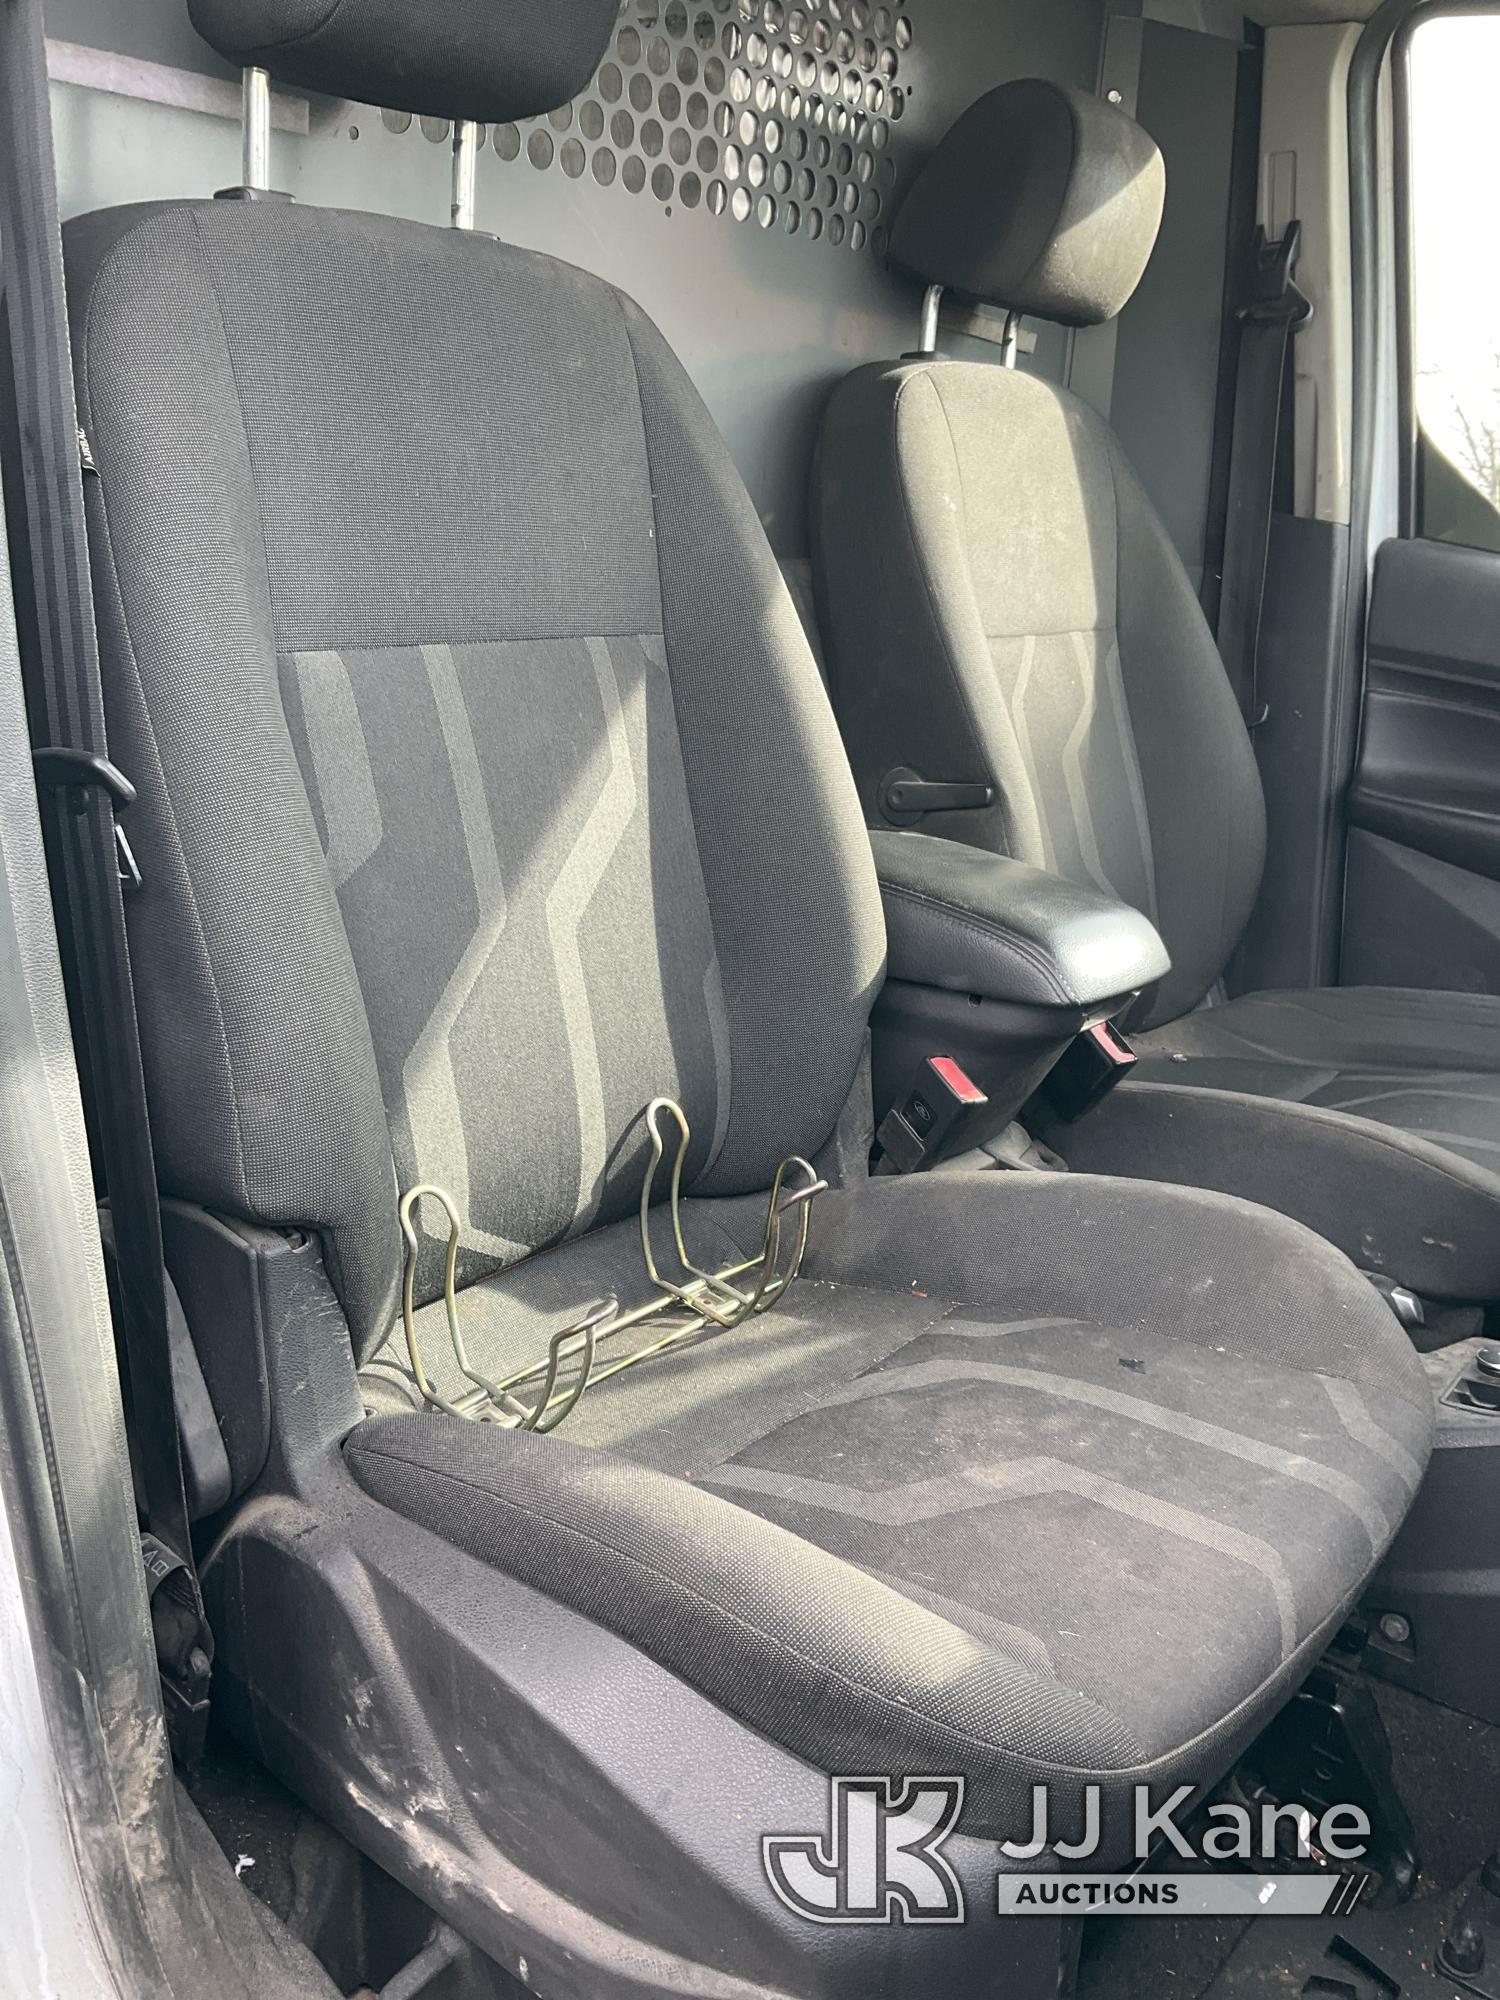 (South Beloit, IL) 2014 Ford Transit Connect Cargo Van Runs, Hard To Move When Warm-No Reverse-Trans